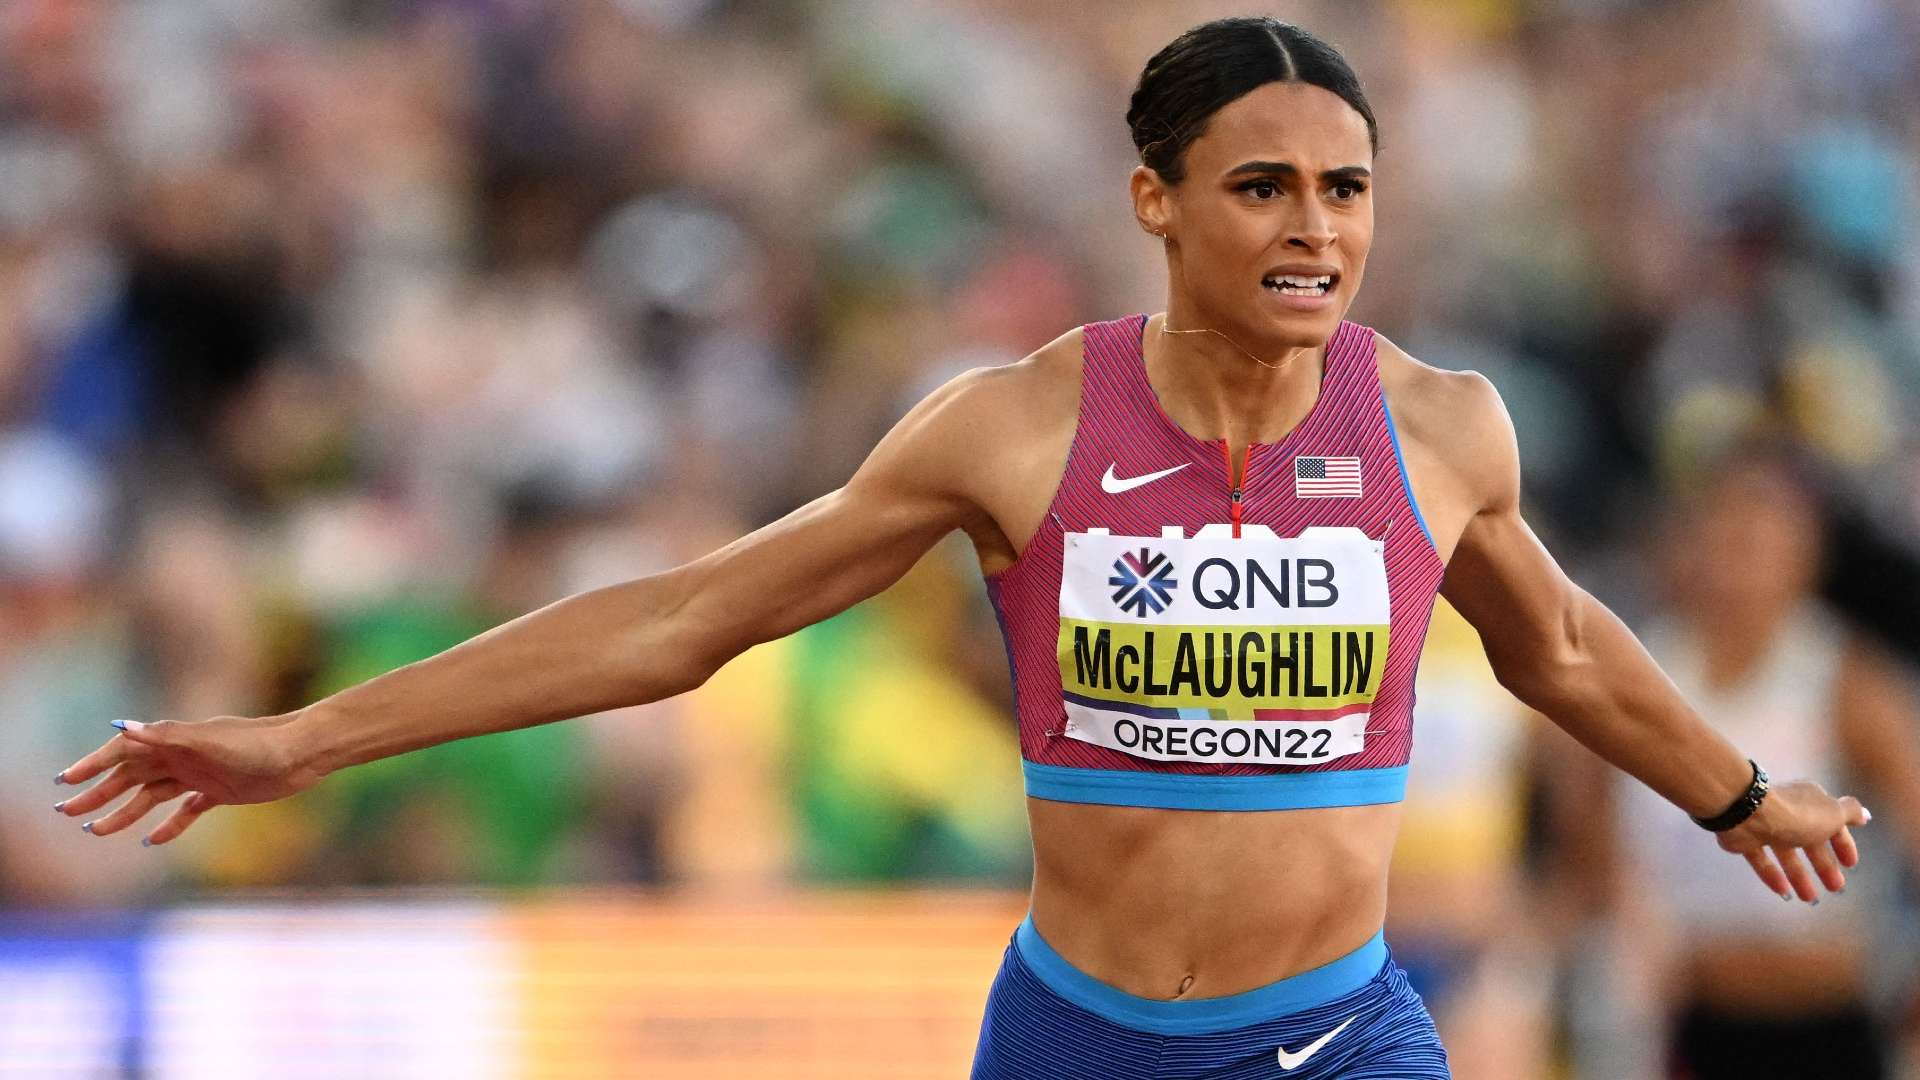 Sydney McLaughlin in a file photo (Image Credits - World Athletics/ Twitter)